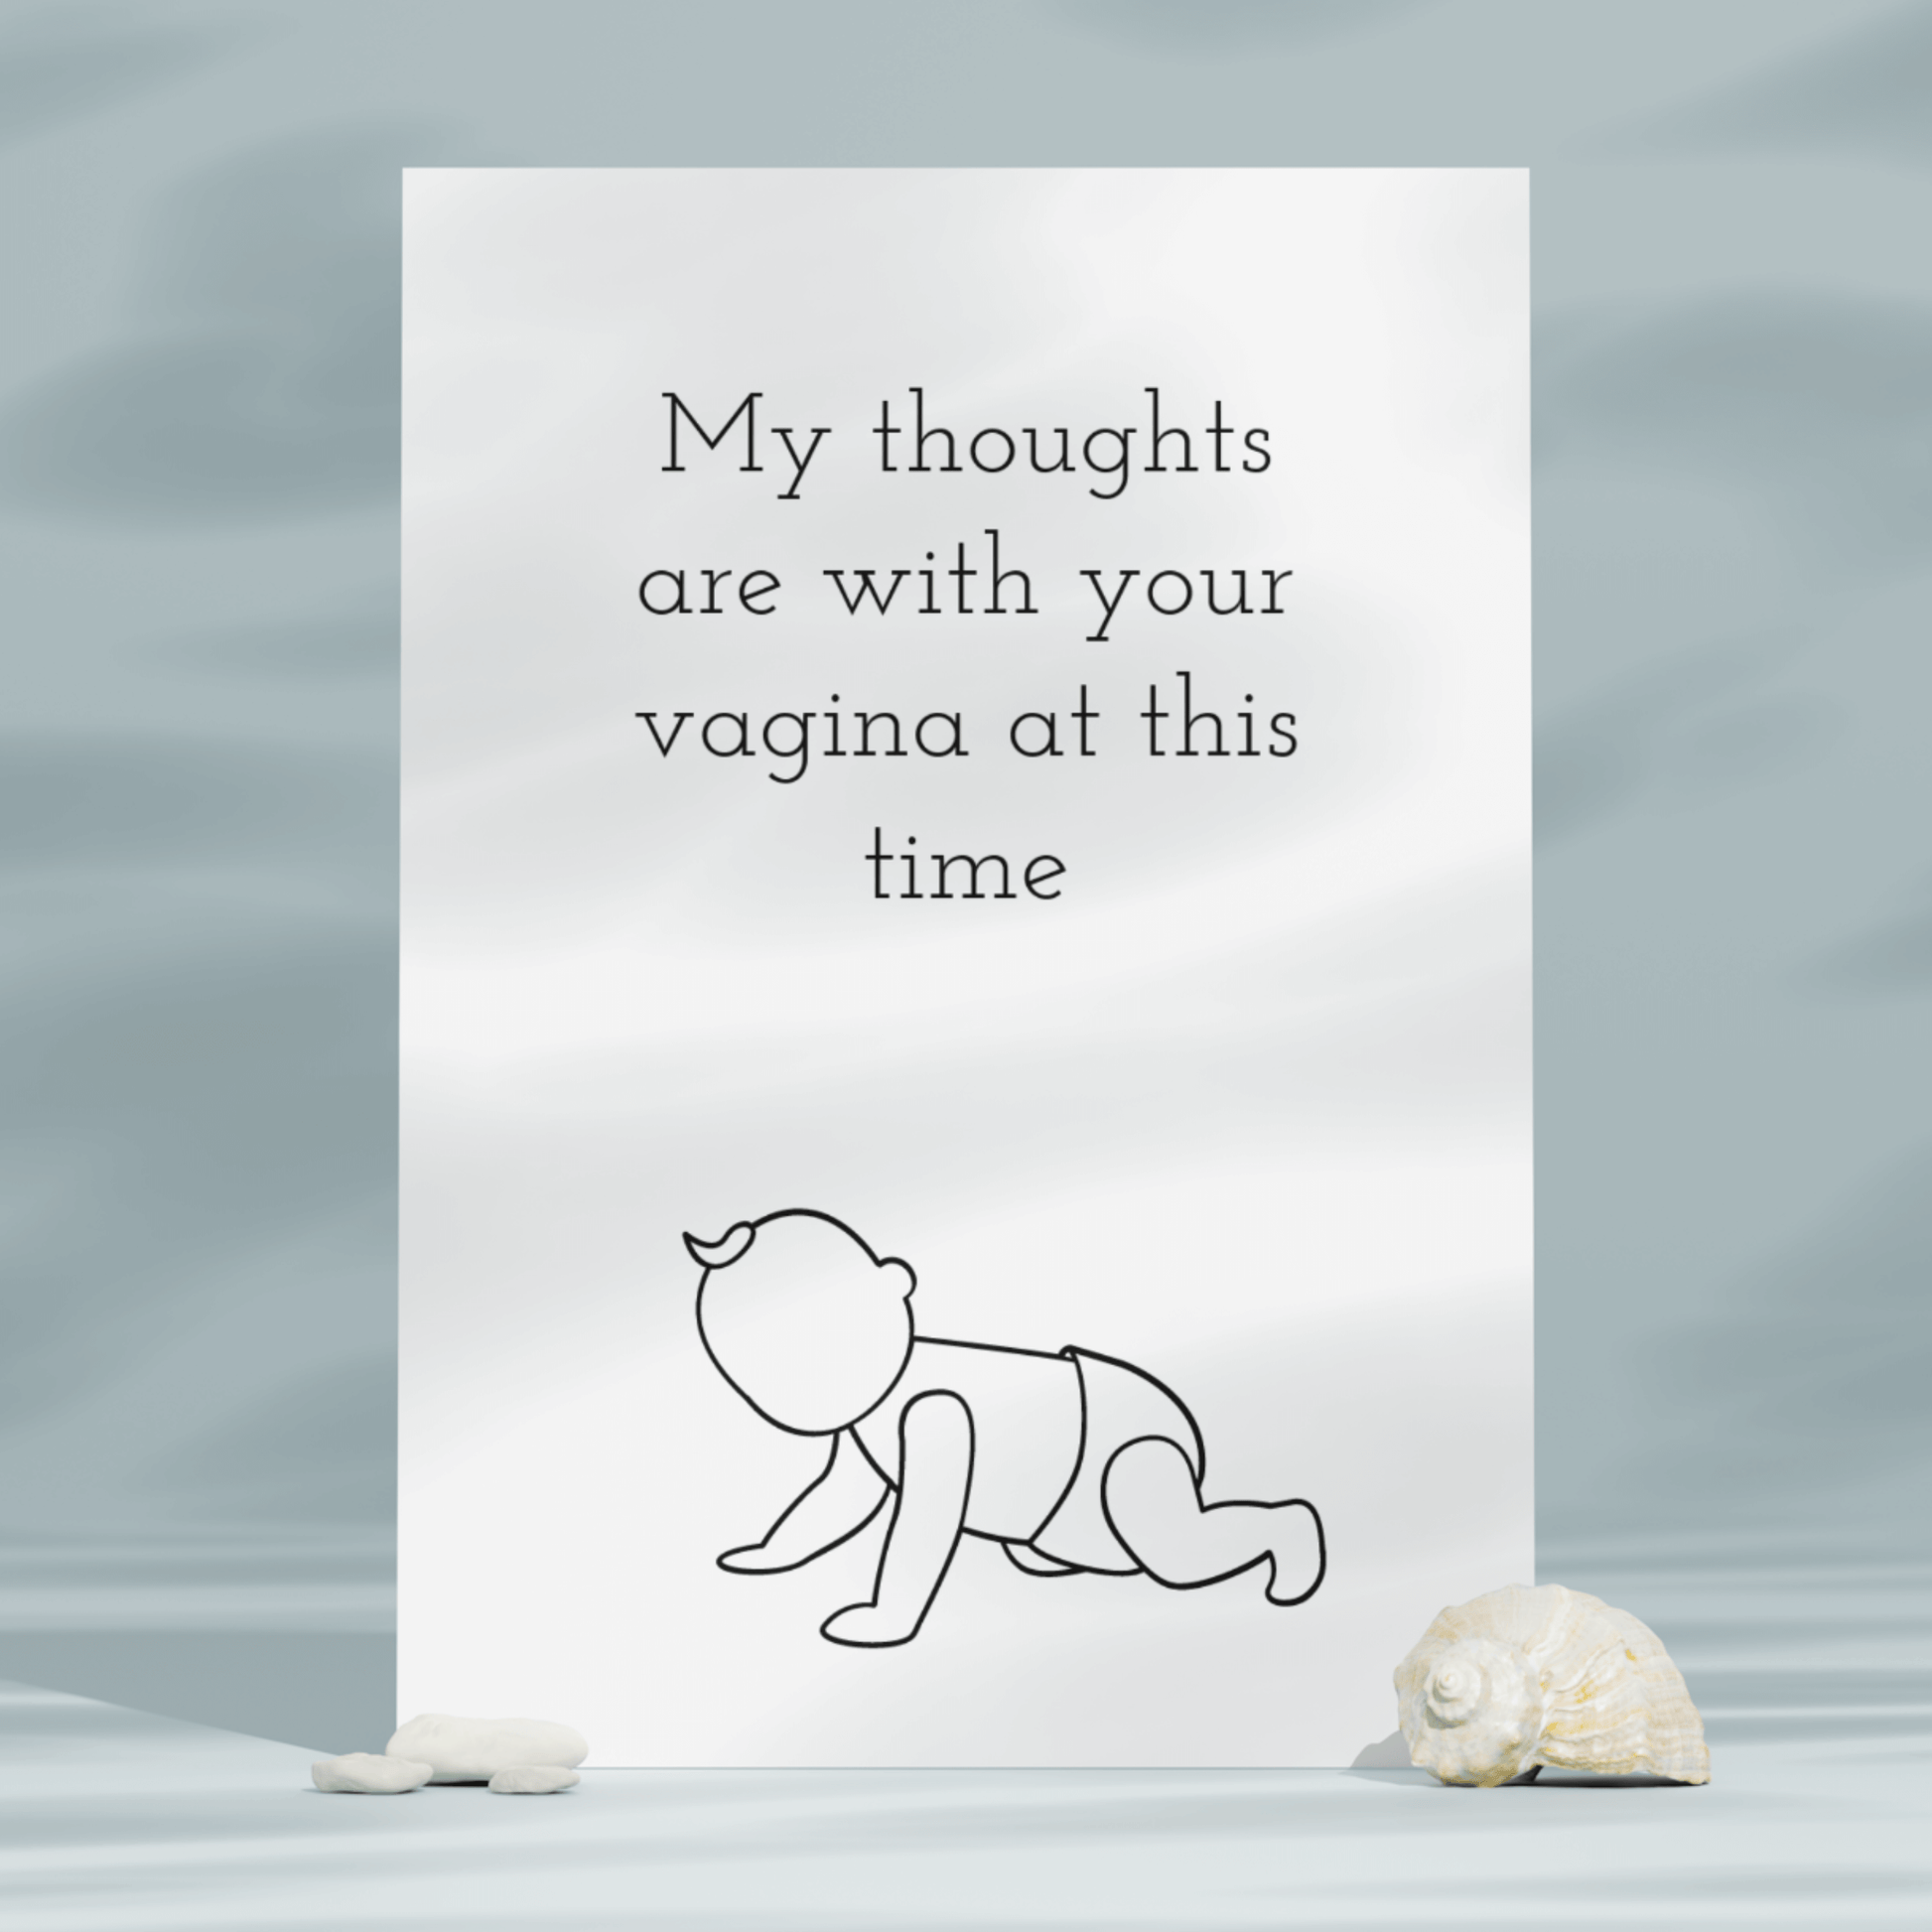 Little Kraken's Thoughts With Your Vagina at This Time, New Baby Cards for £3.50 each